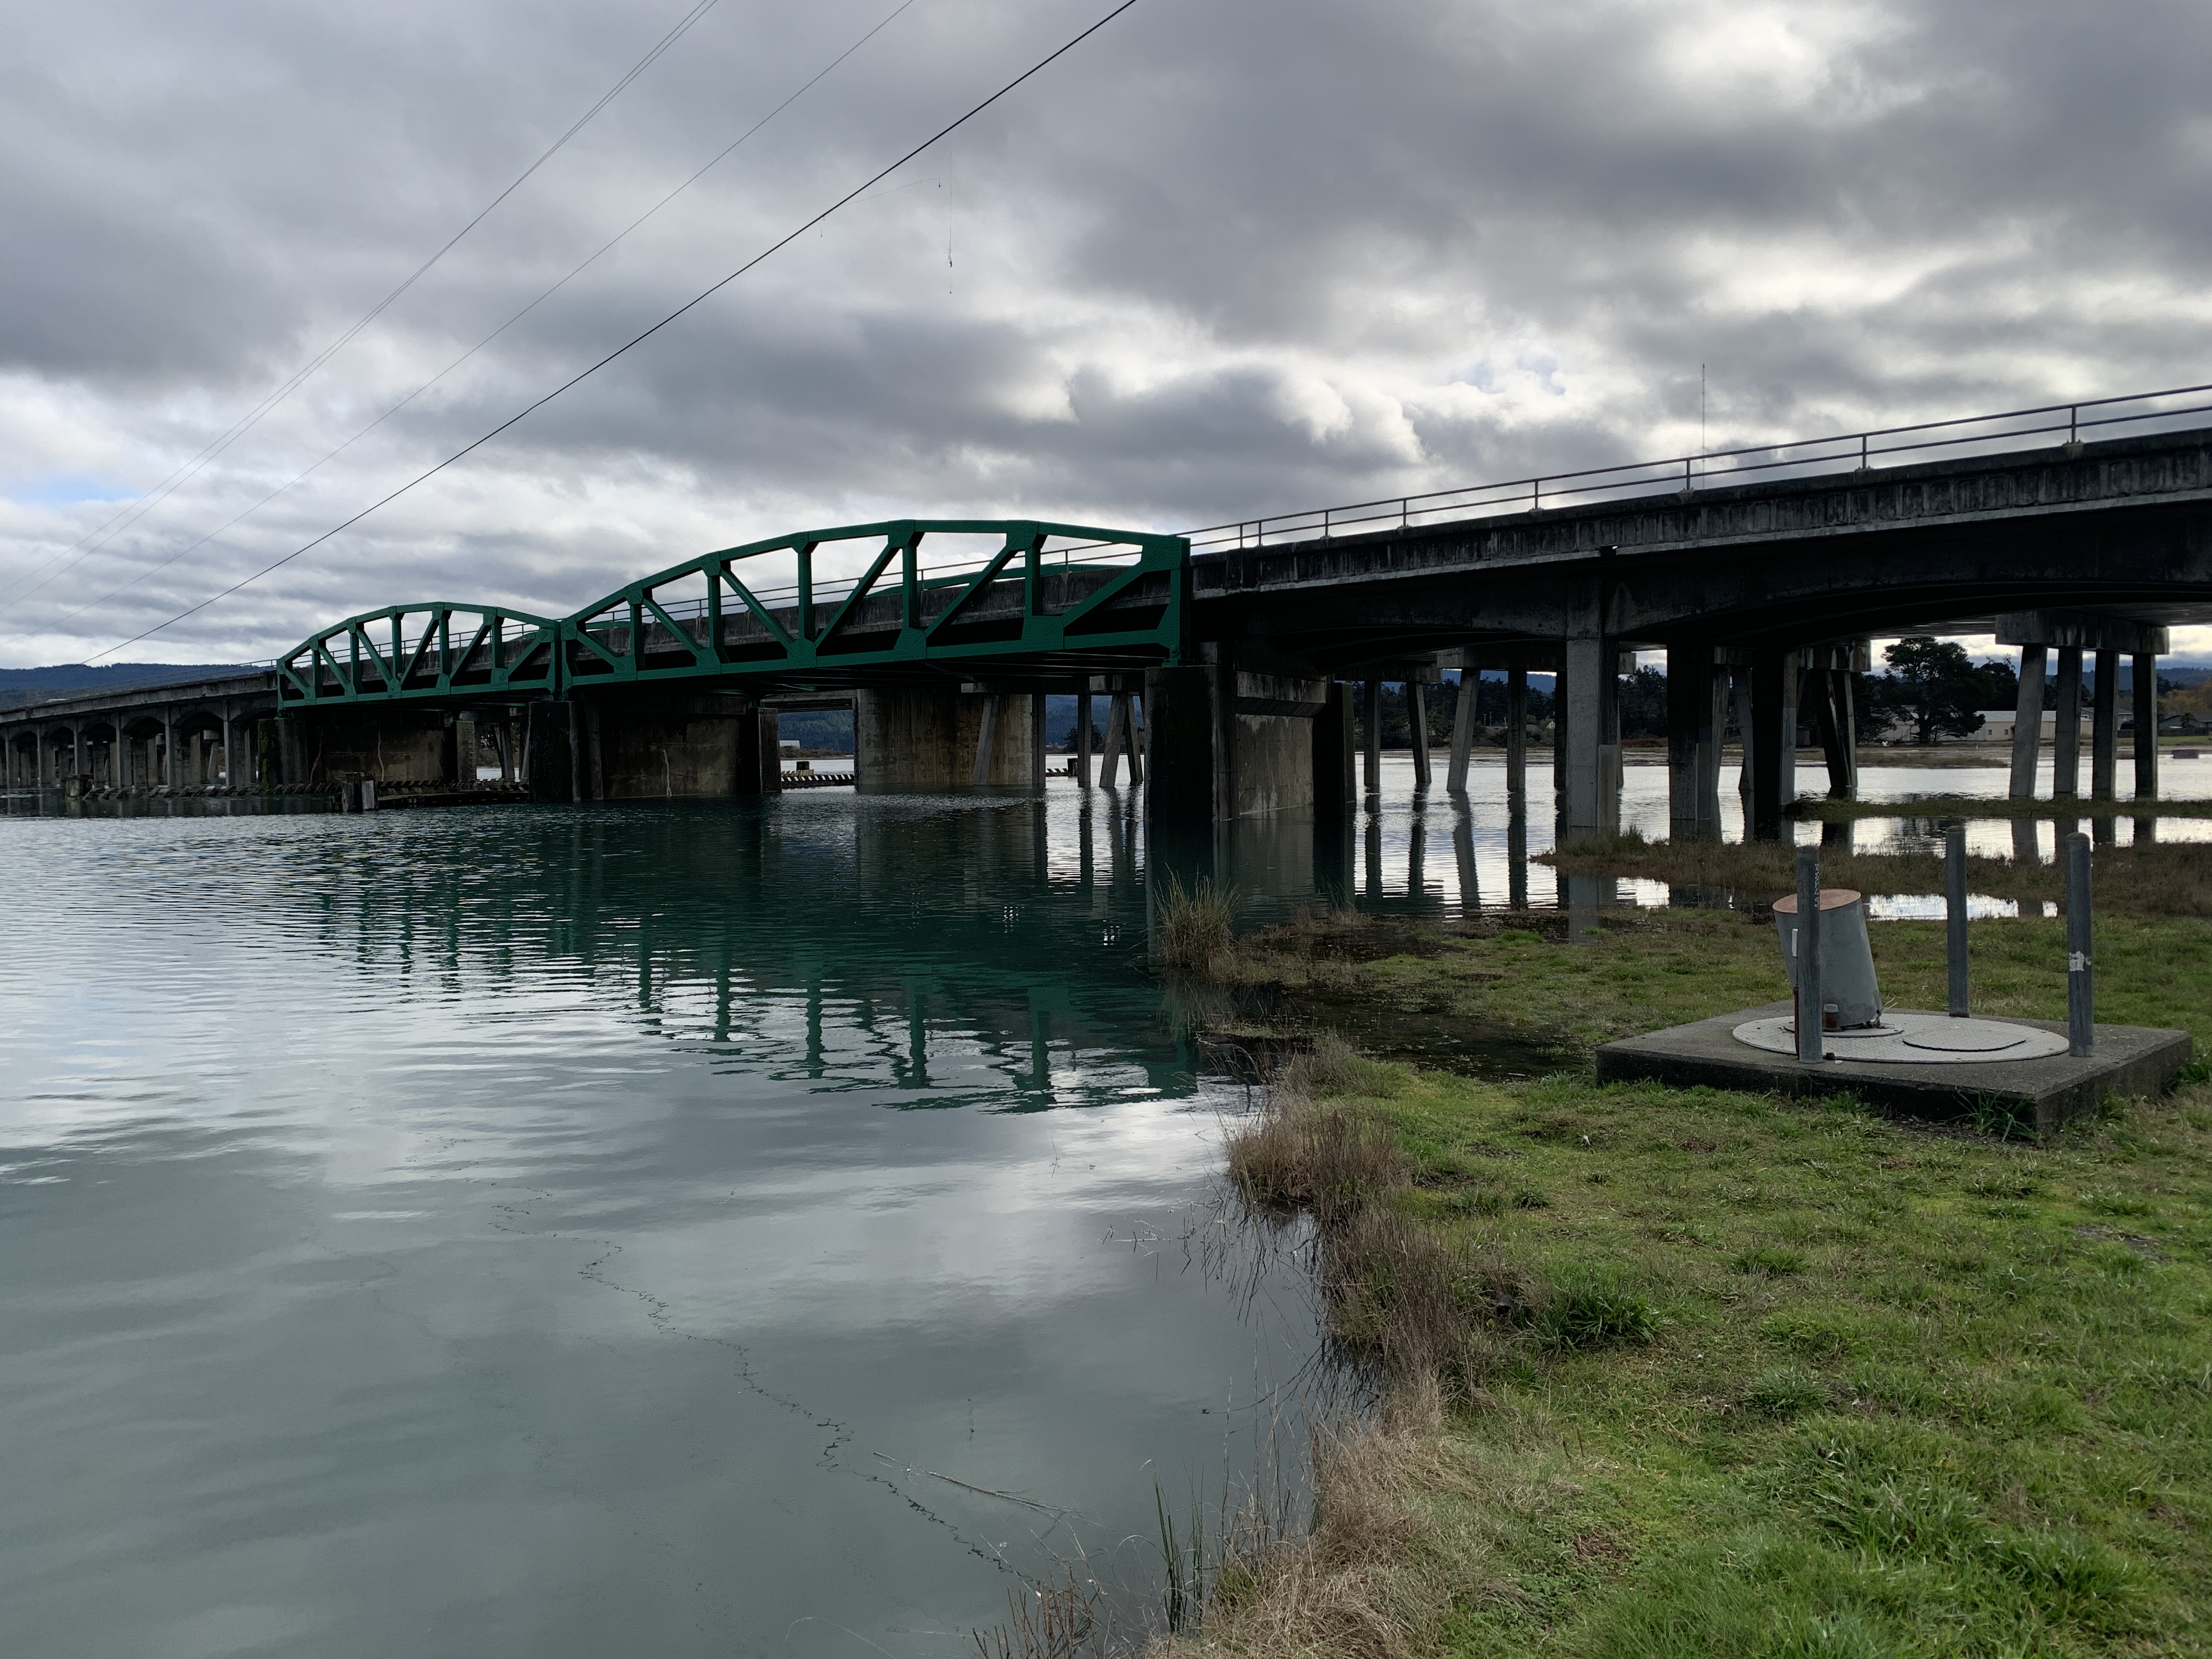 Eureka Slough Bridge looking west. Concrete pillars extend from under the bridge deck into the green water of the Eureka Slough. 